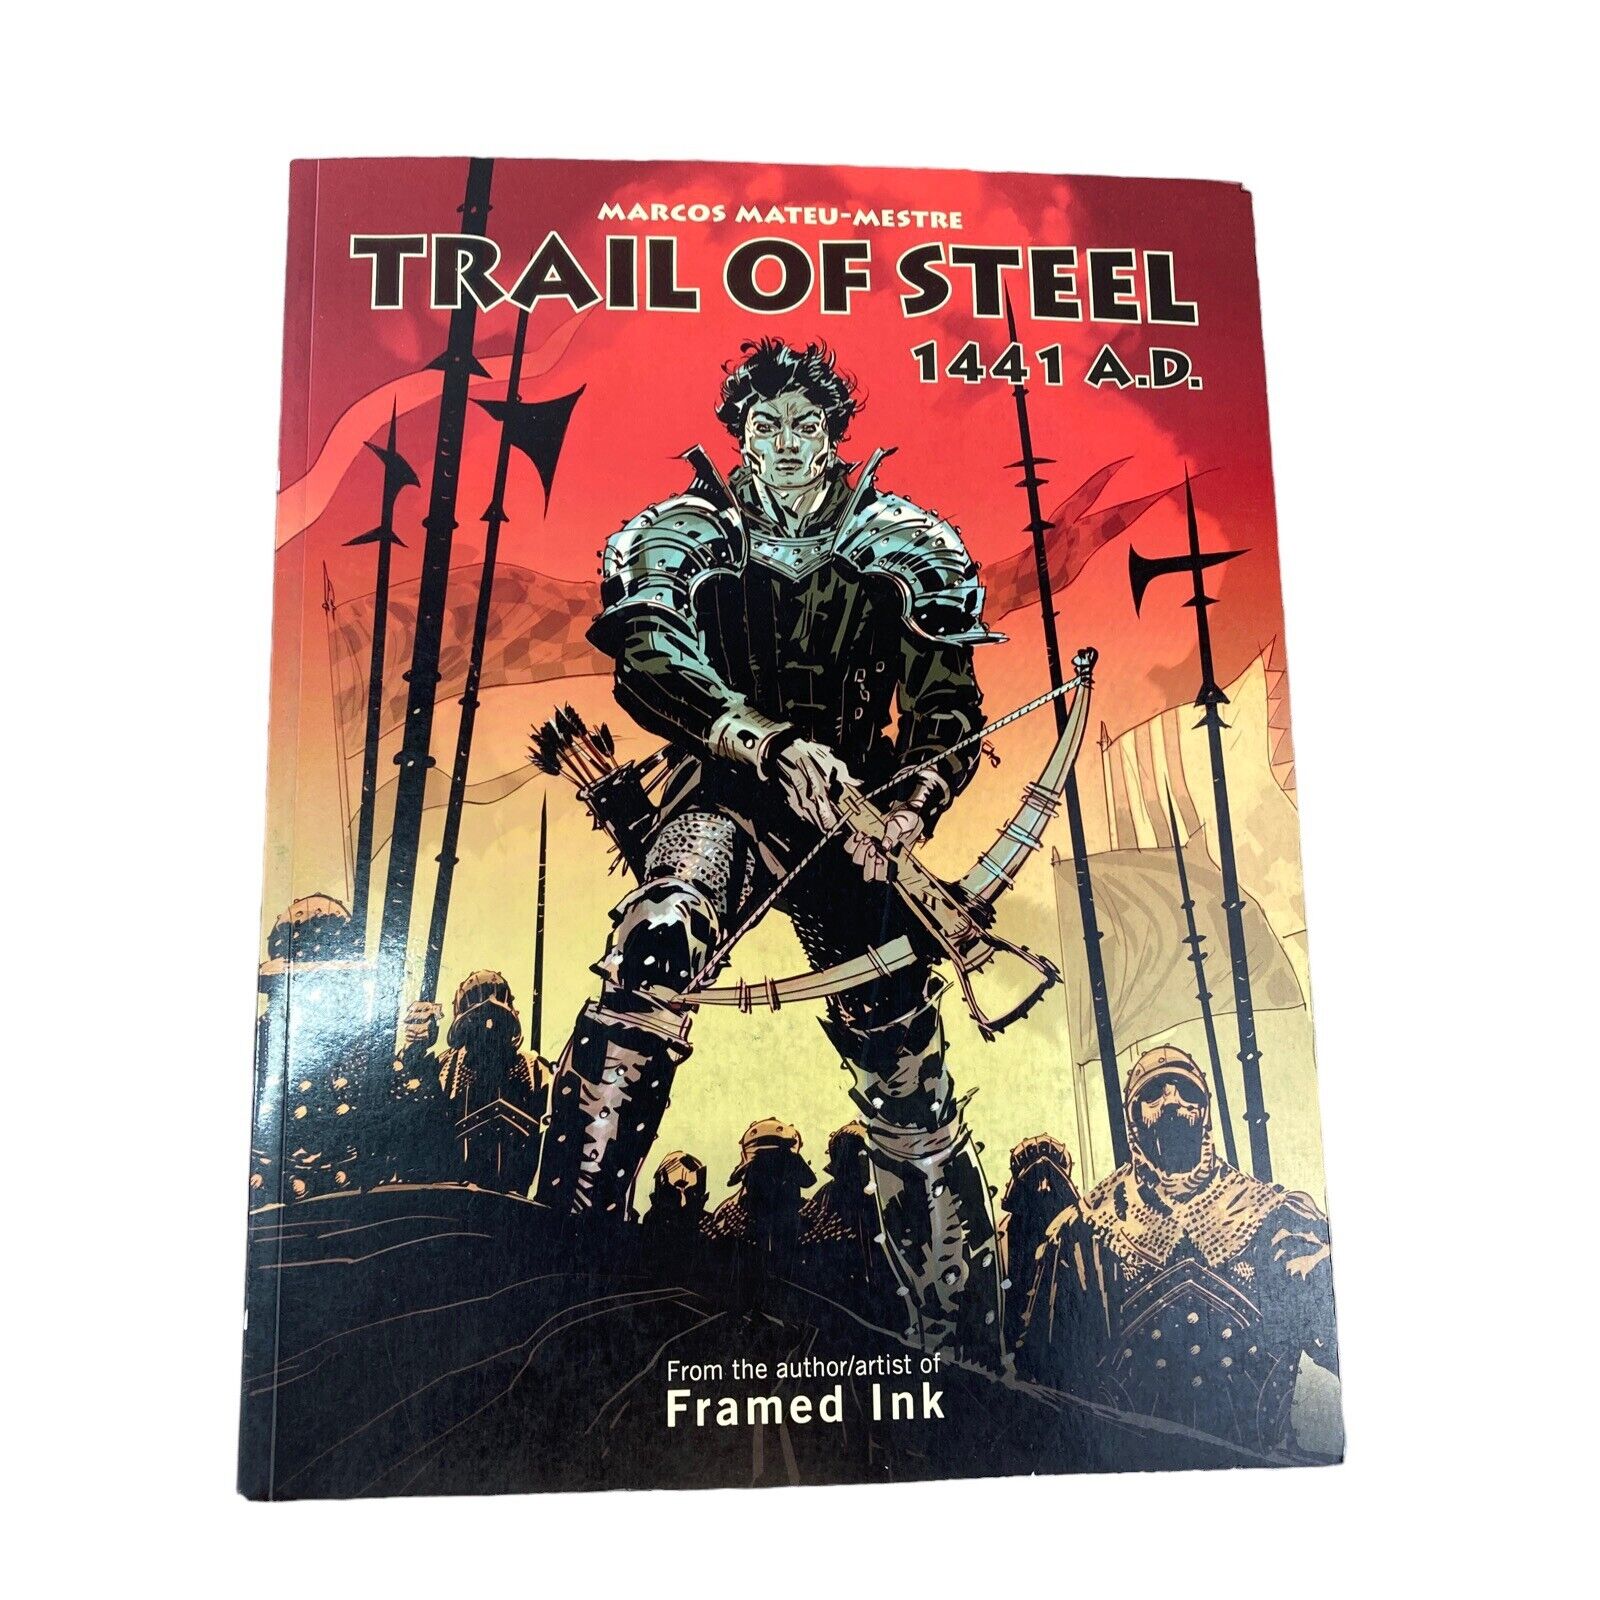 Trail of Steel: 1441 A.D. by Marcos Mateu - Mestre July 2012 First Edition Book